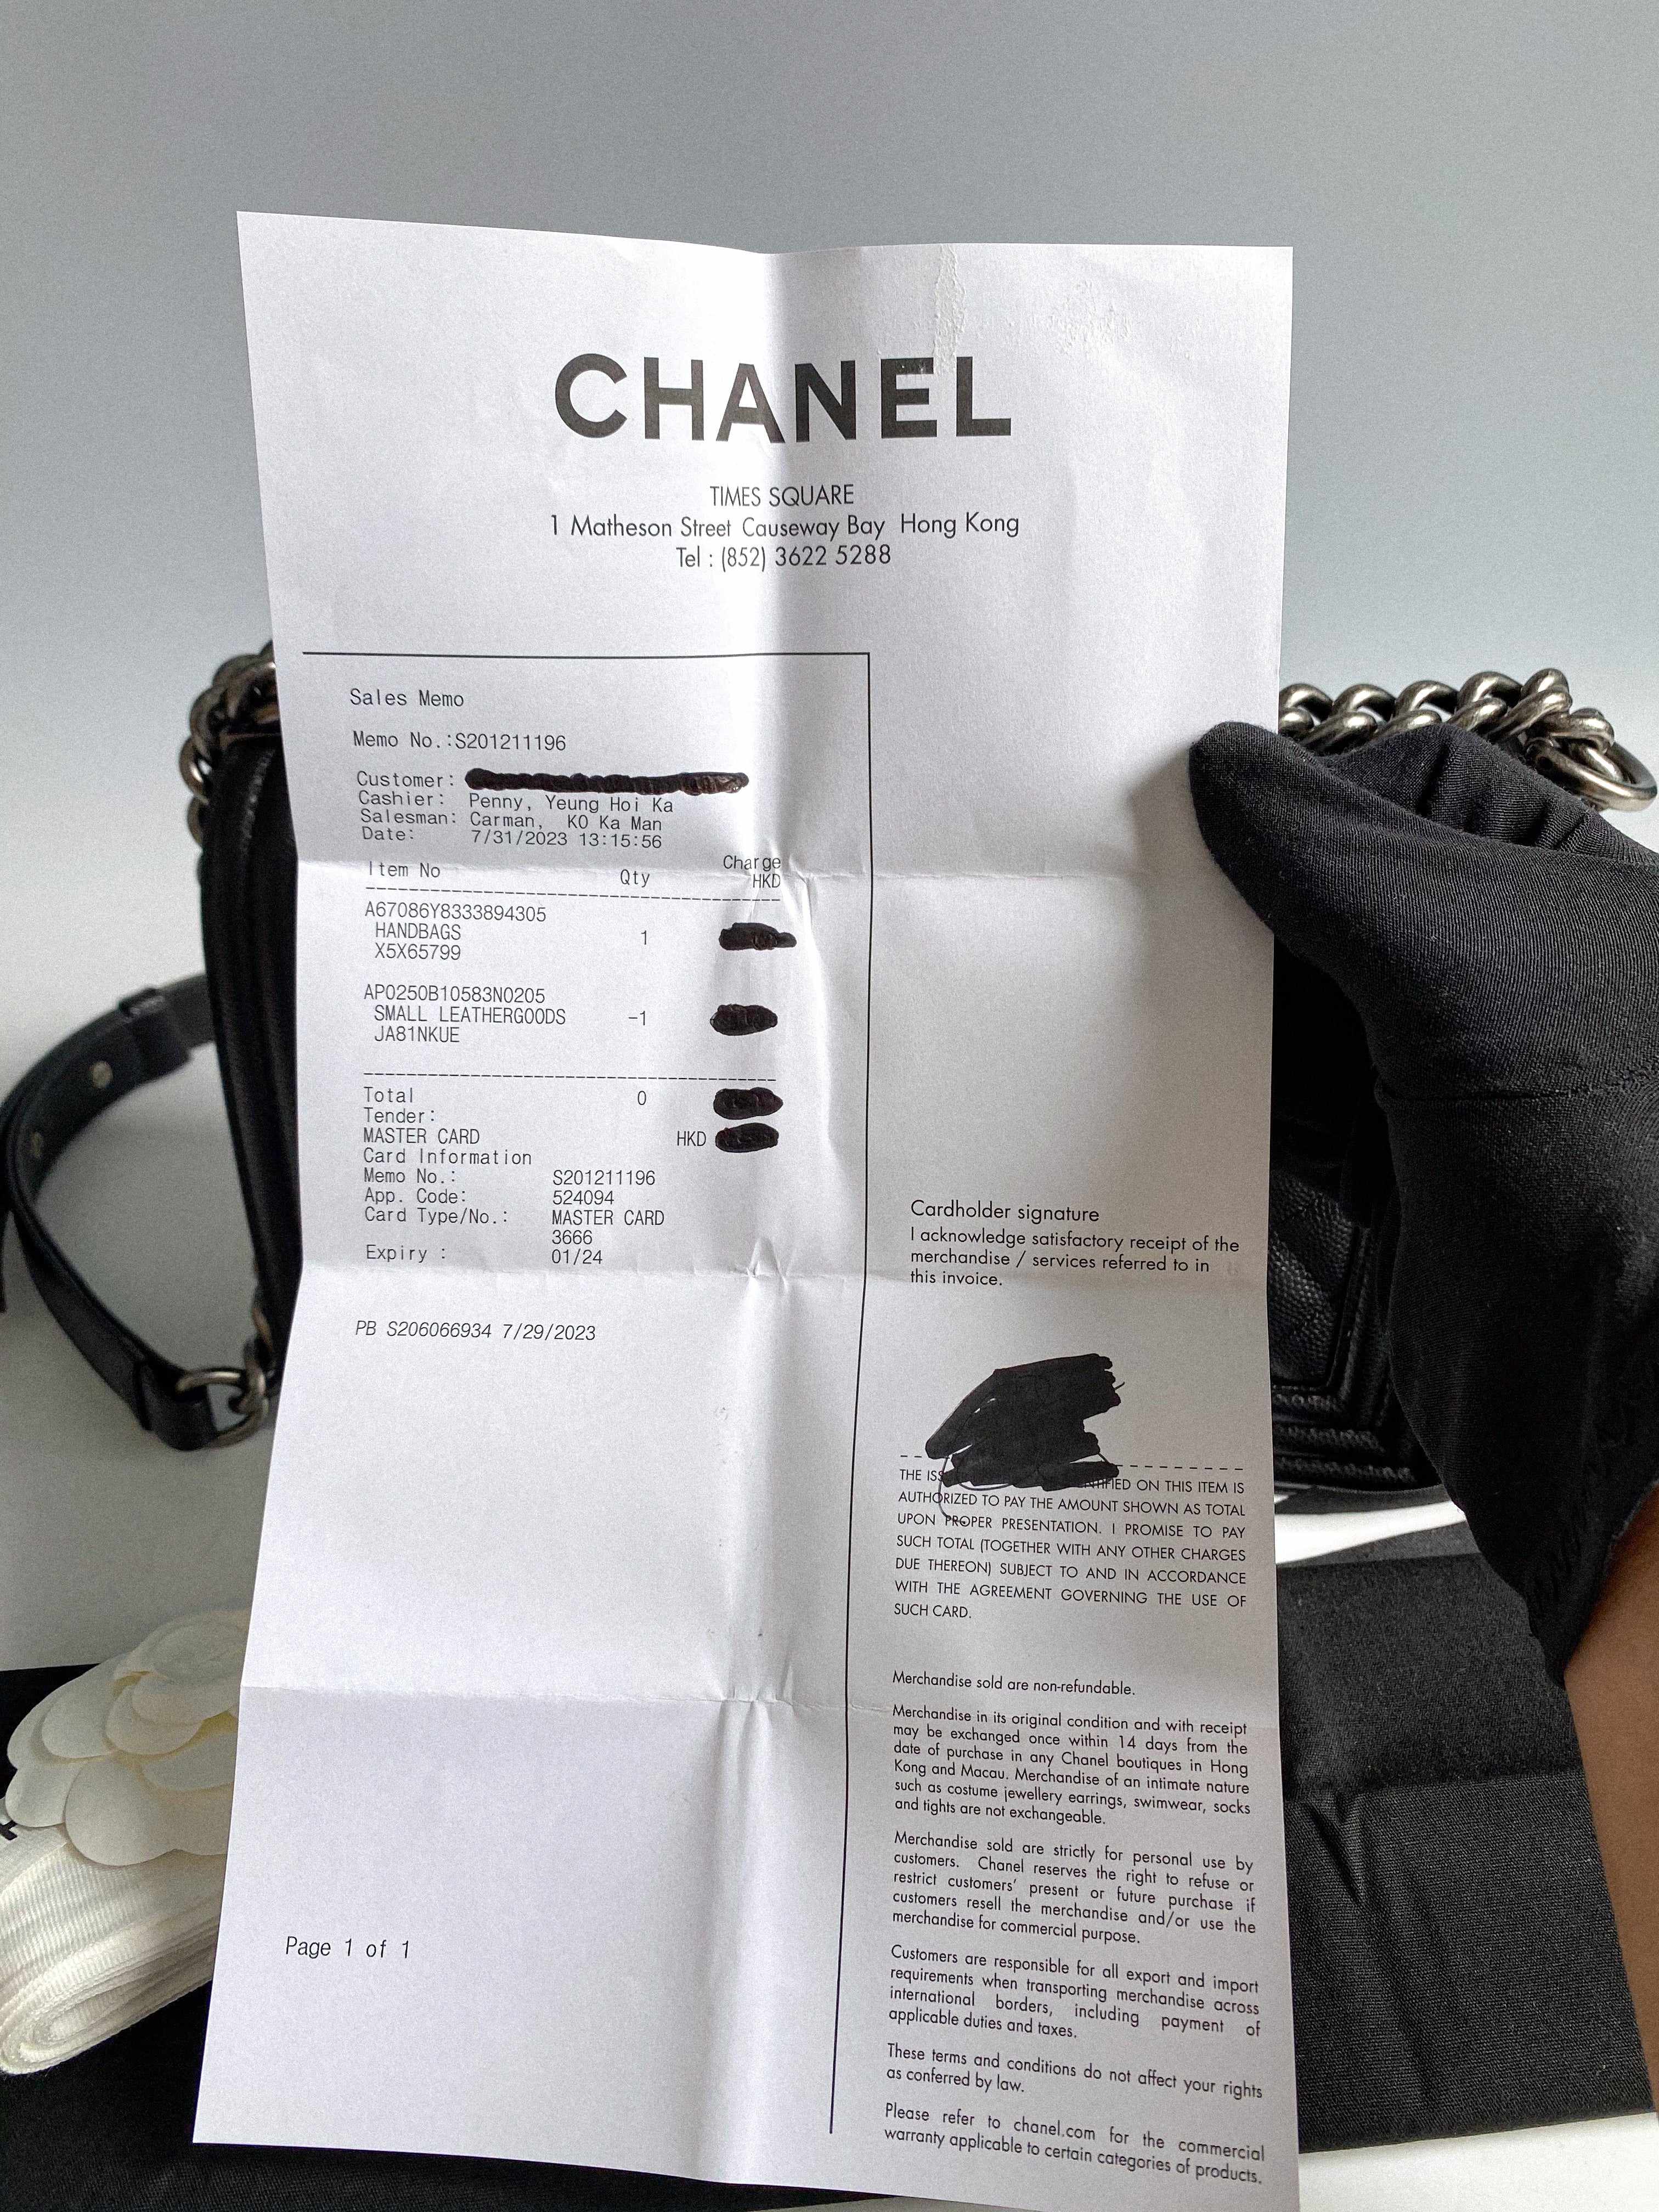 Chanel Boy Old Medium in Black Caviar Leather and Aged Ruthenium Hardware (Microchip)